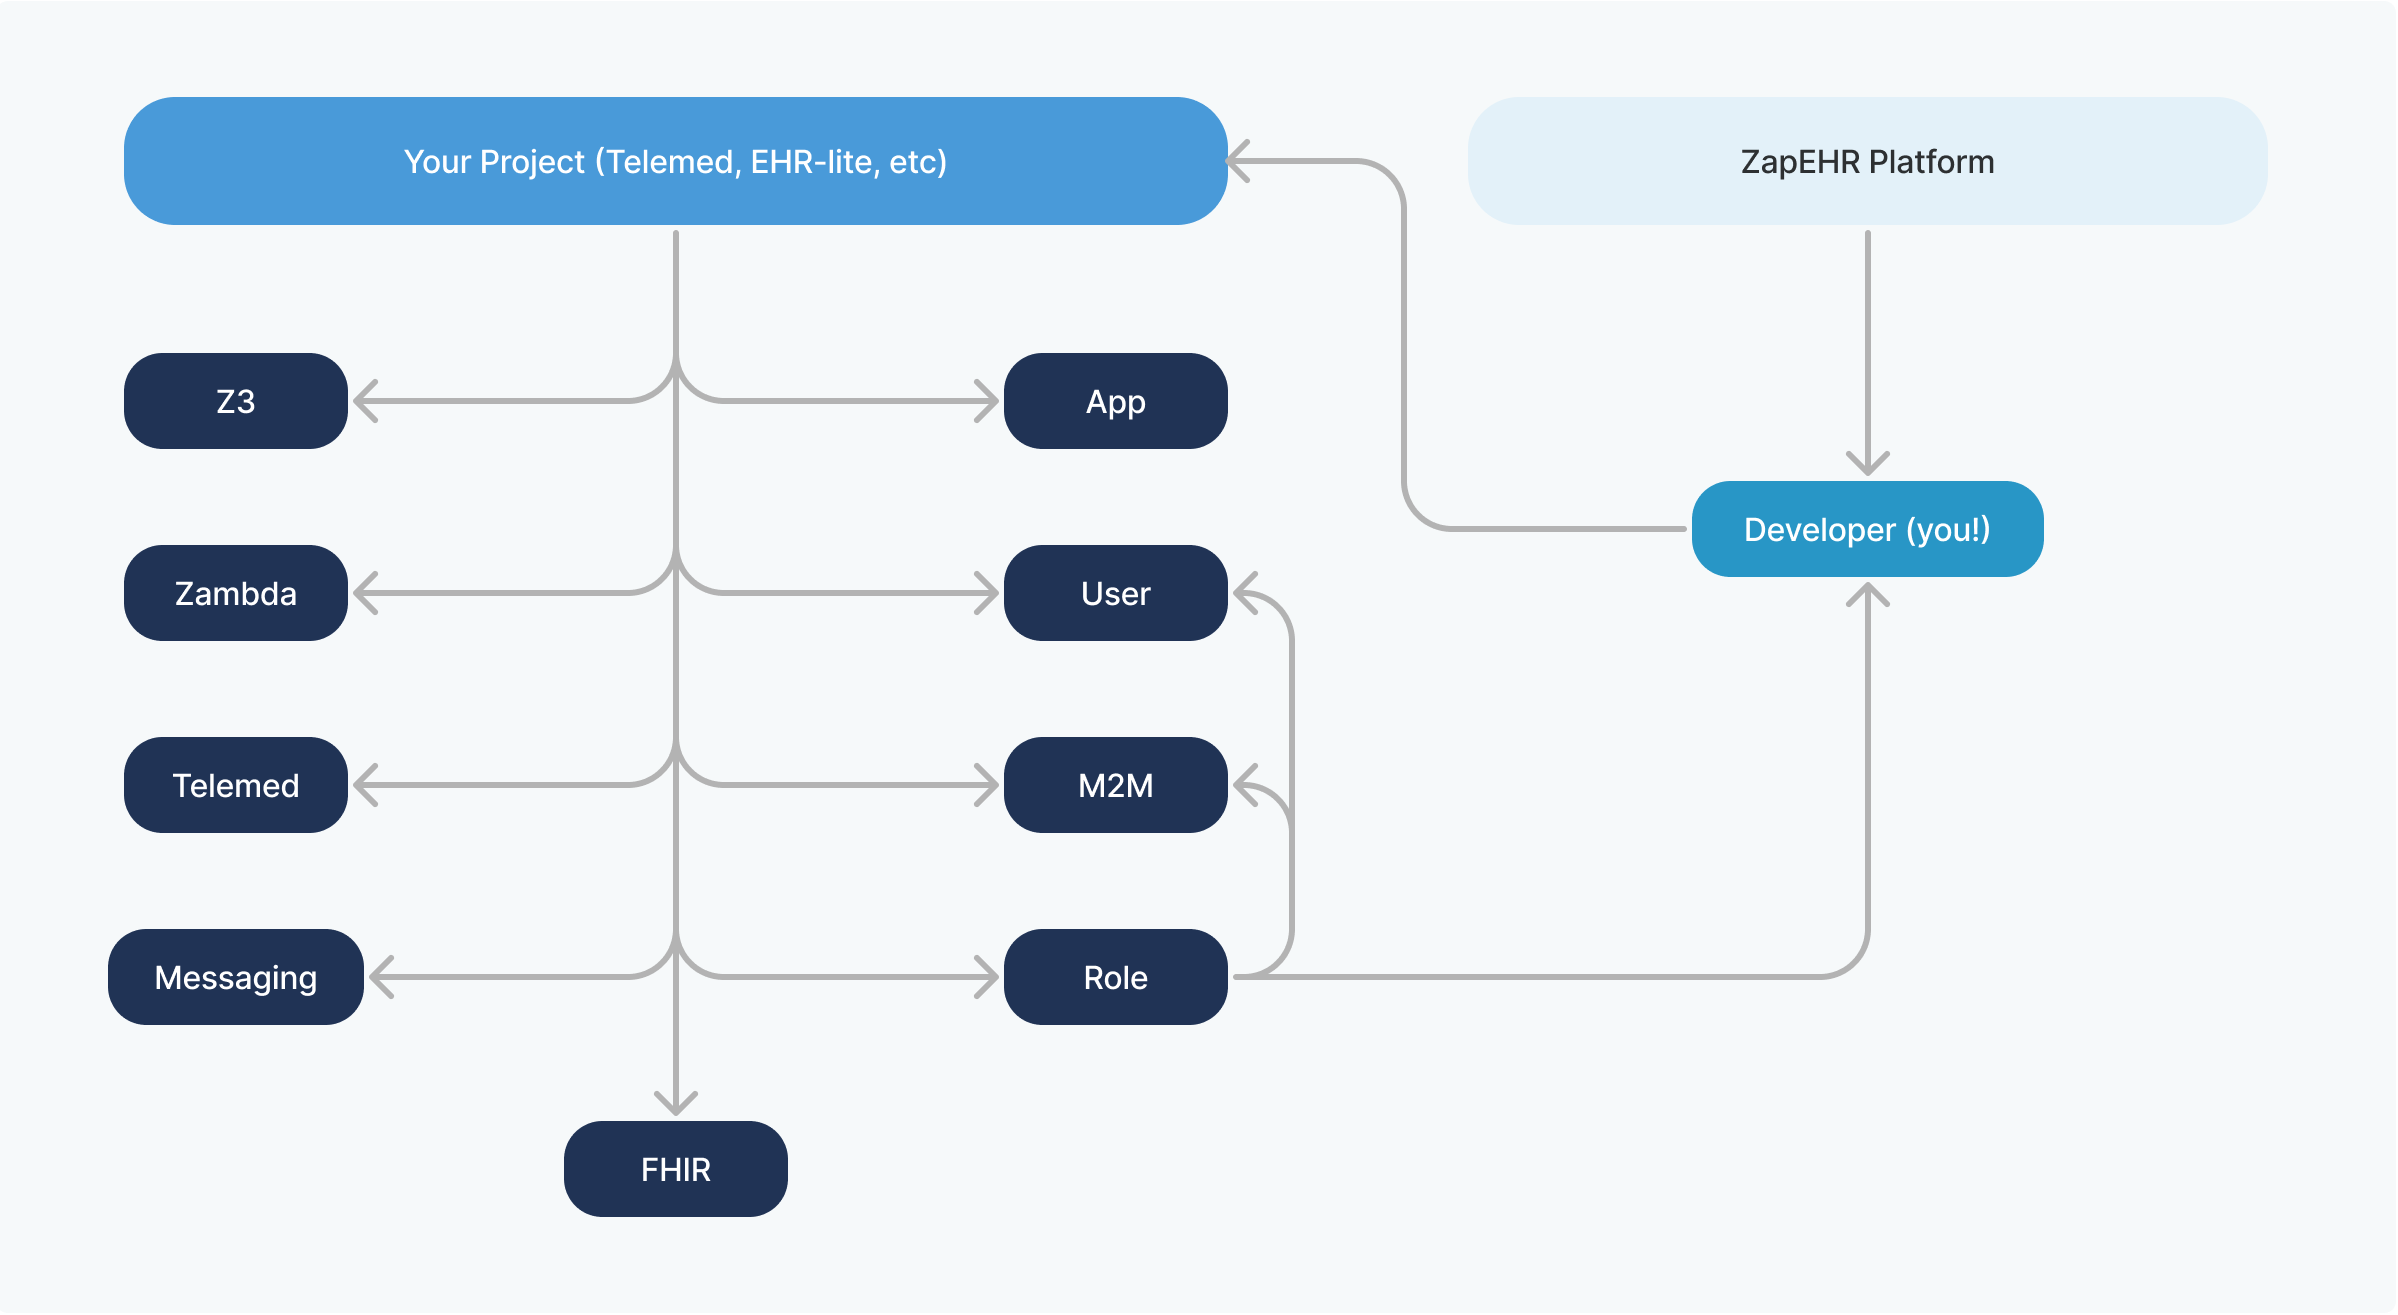 ZapEHR information architecture, a chart with 'ZapEHR Platform' pointing to 'Developer (you!)'. 'Developer' points to 'Your Project (Telemed, EHR-lite, etc)'. 'Your Project' points to 'Z3', 'App', 'Zambda', 'User', 'Telemed', 'M2M', 'Messaging', 'Role', 'FHIR'. 'Role' points to 'Developer', 'M2M', and 'User'.